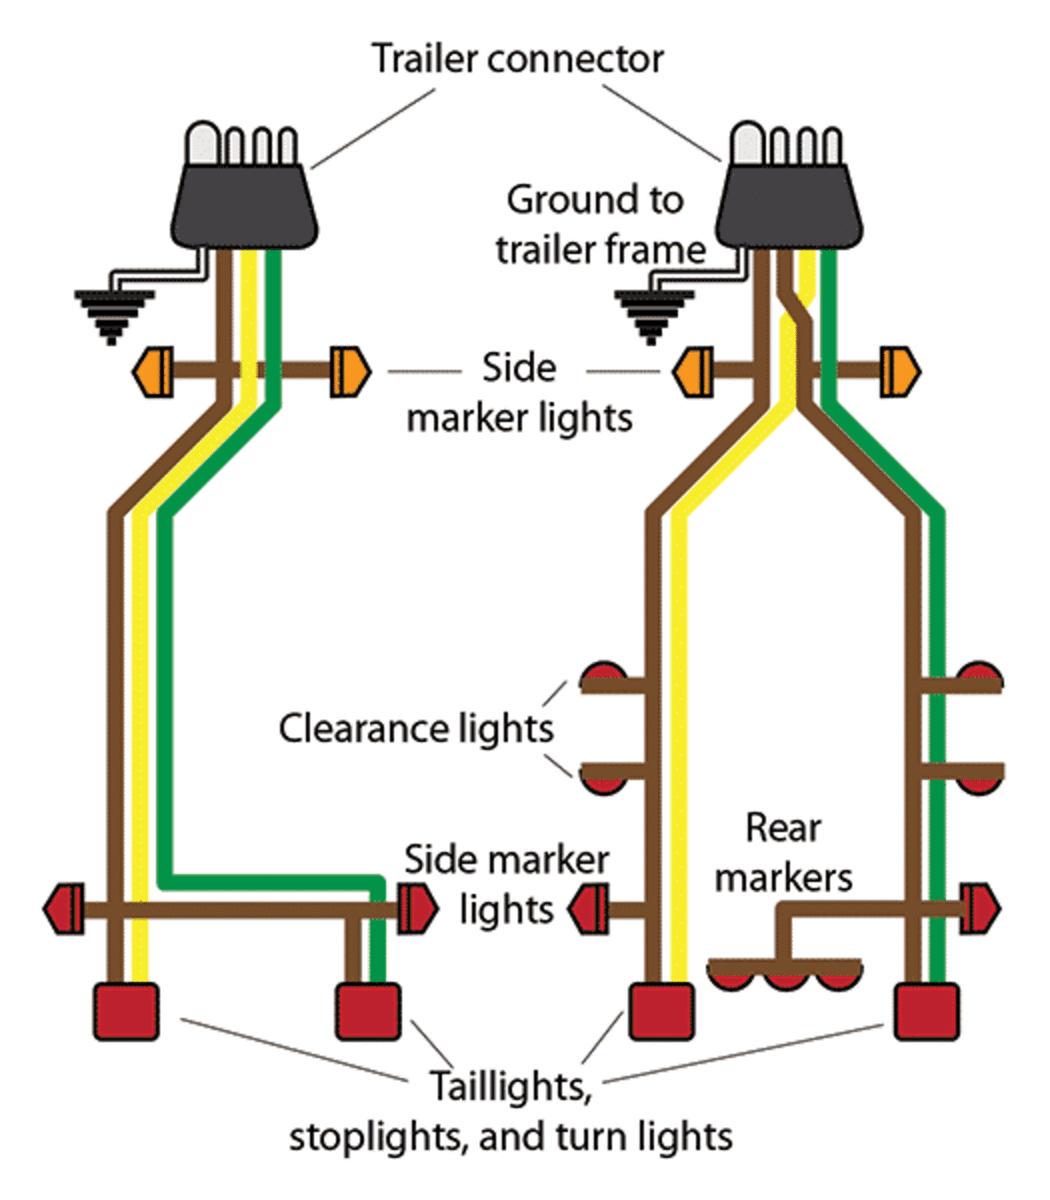 Tips for Installing 4-Pin Trailer Wiring - AxleAddict  Trailer Light Wiring Diagram 4 Way    AxleAddict